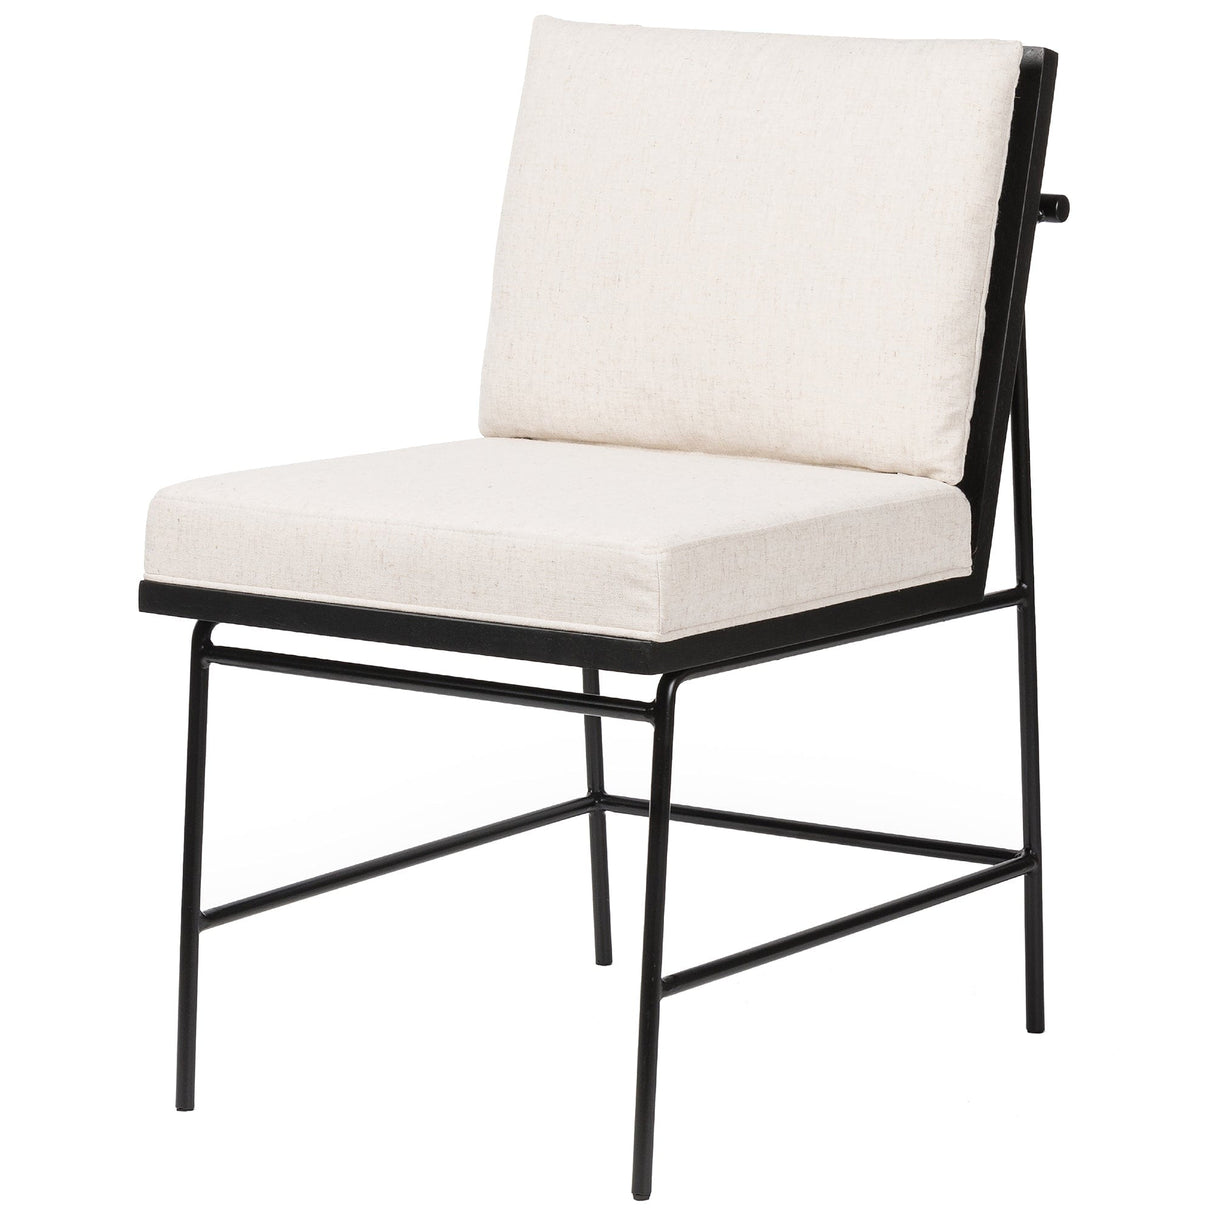 Four Hands Crete Dining Chair Furniture four-hands-108419-006 801542801816